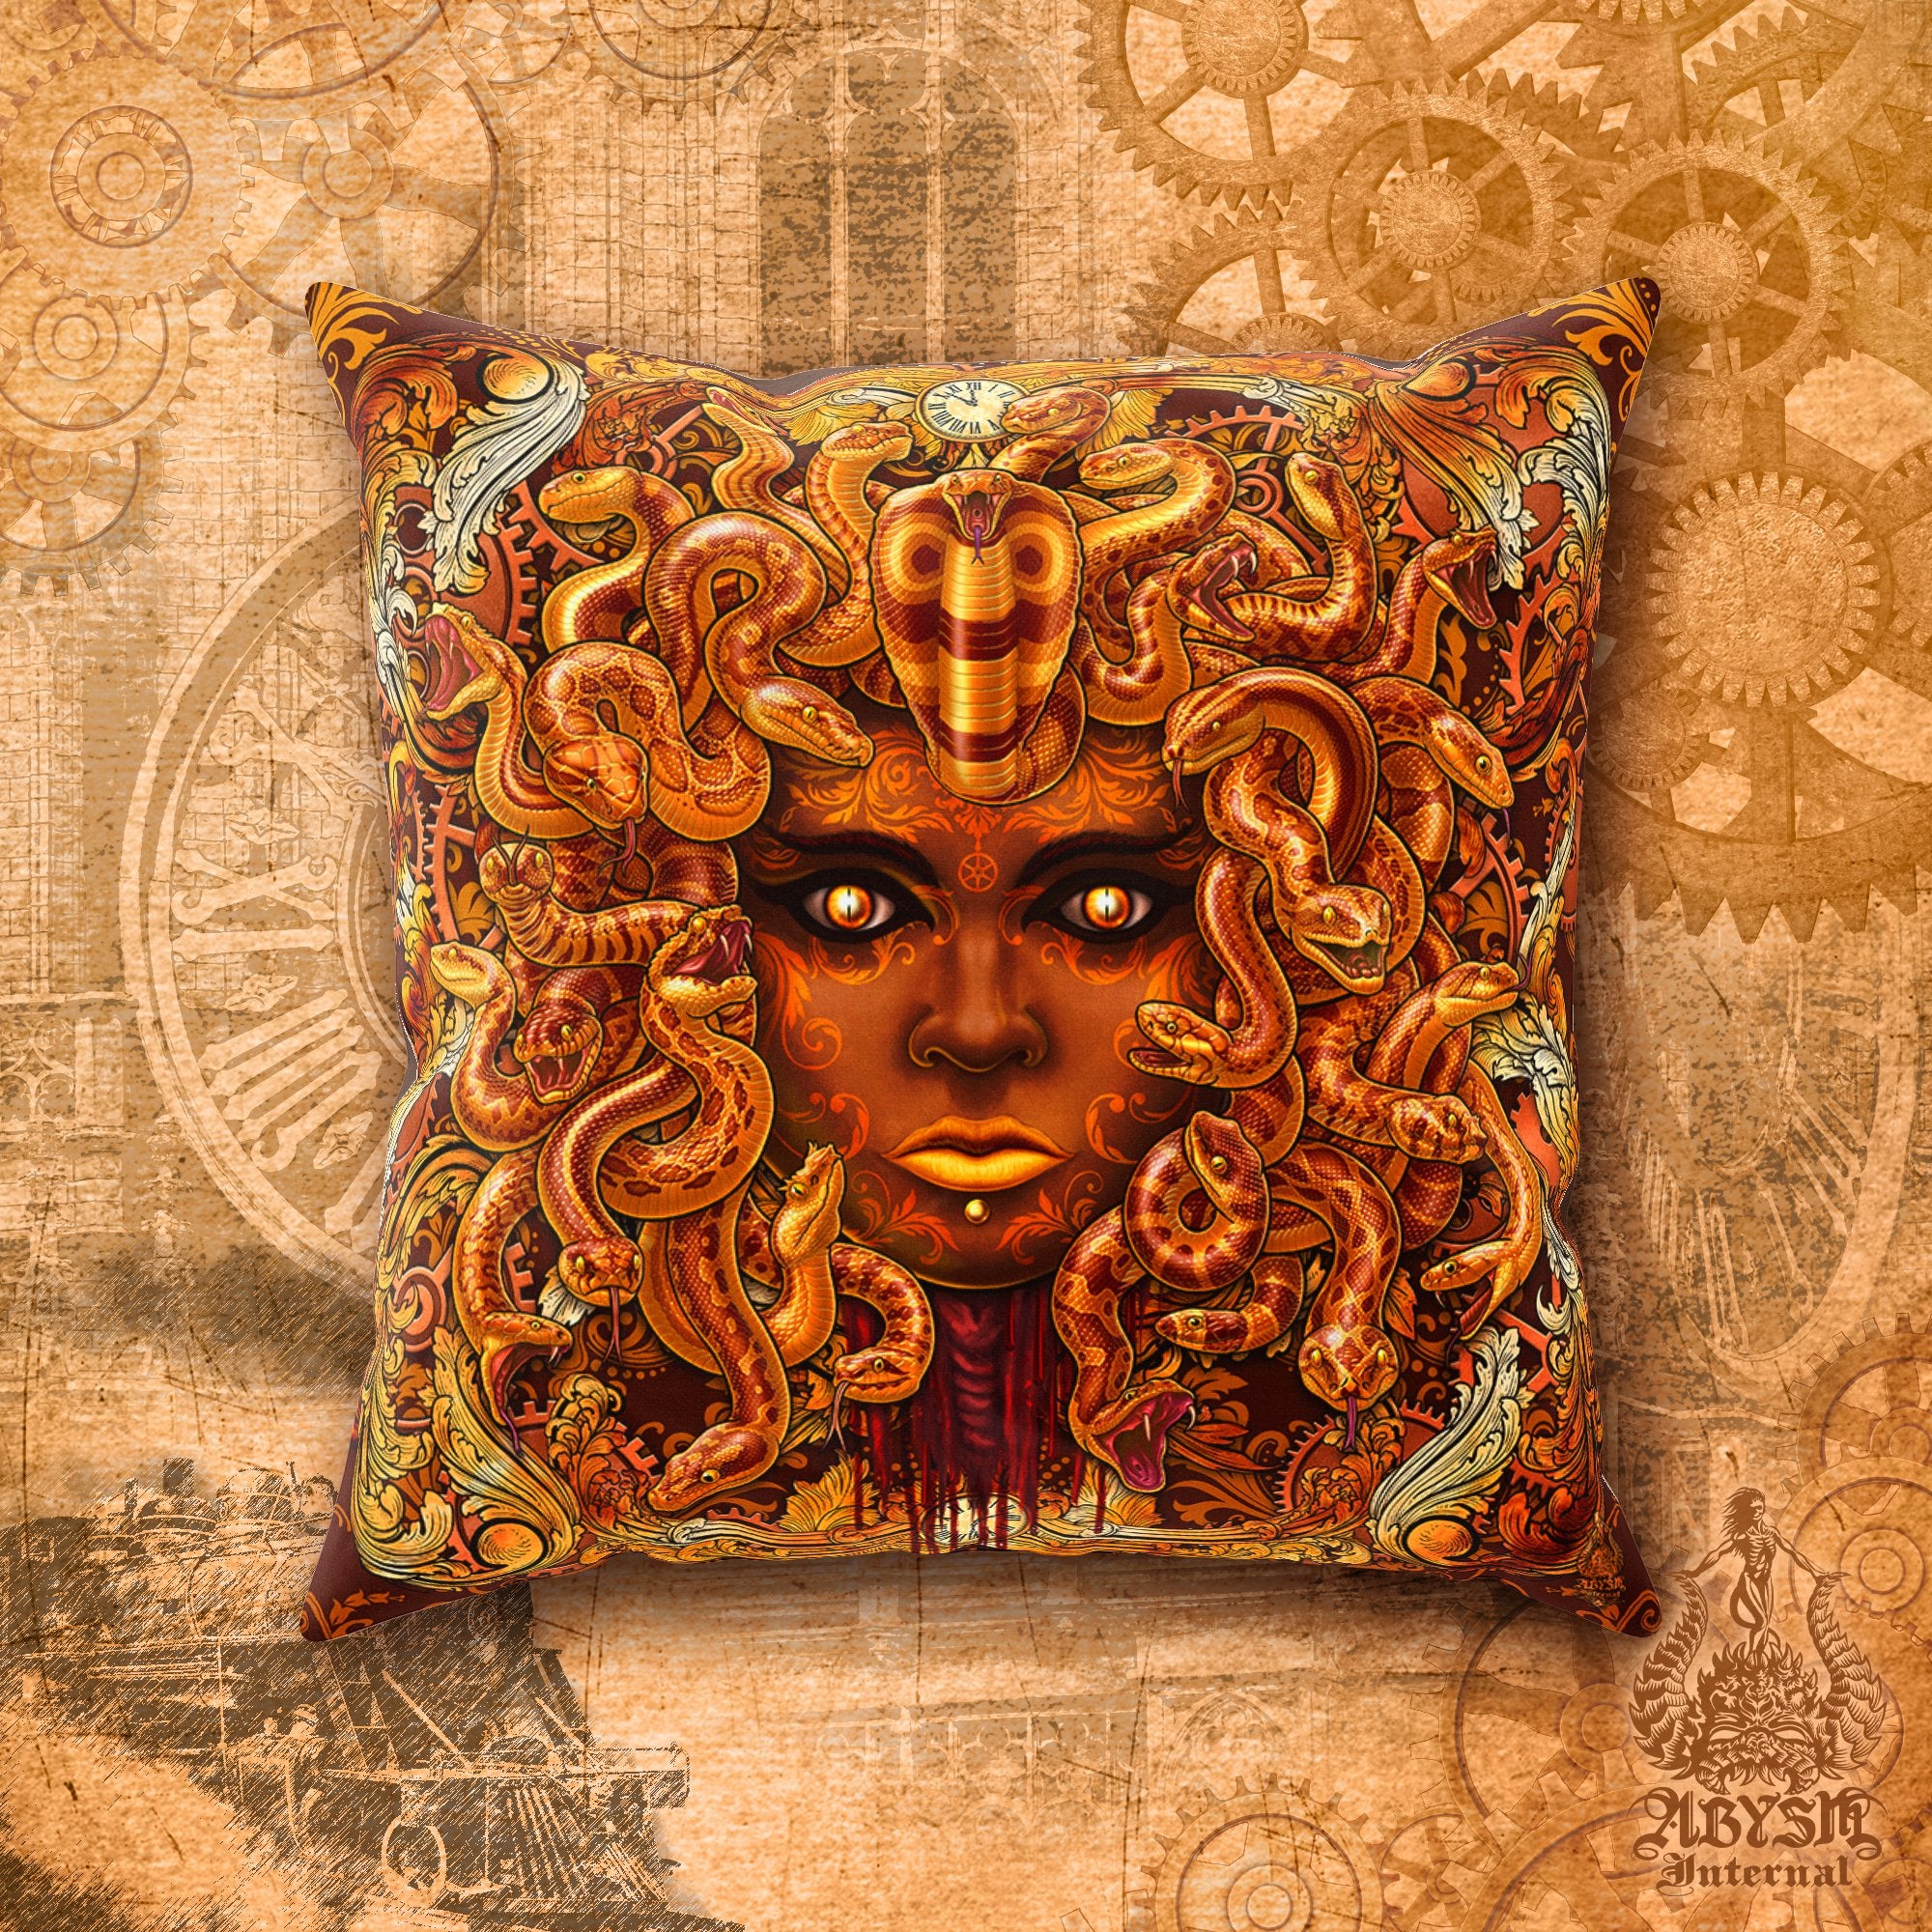 Steampunk Throw Pillow, Decorative Accent Pillow, Square Cushion Cover, Medusa, Gamer Room Decor - Bronze Snakes, Mock - Abysm Internal